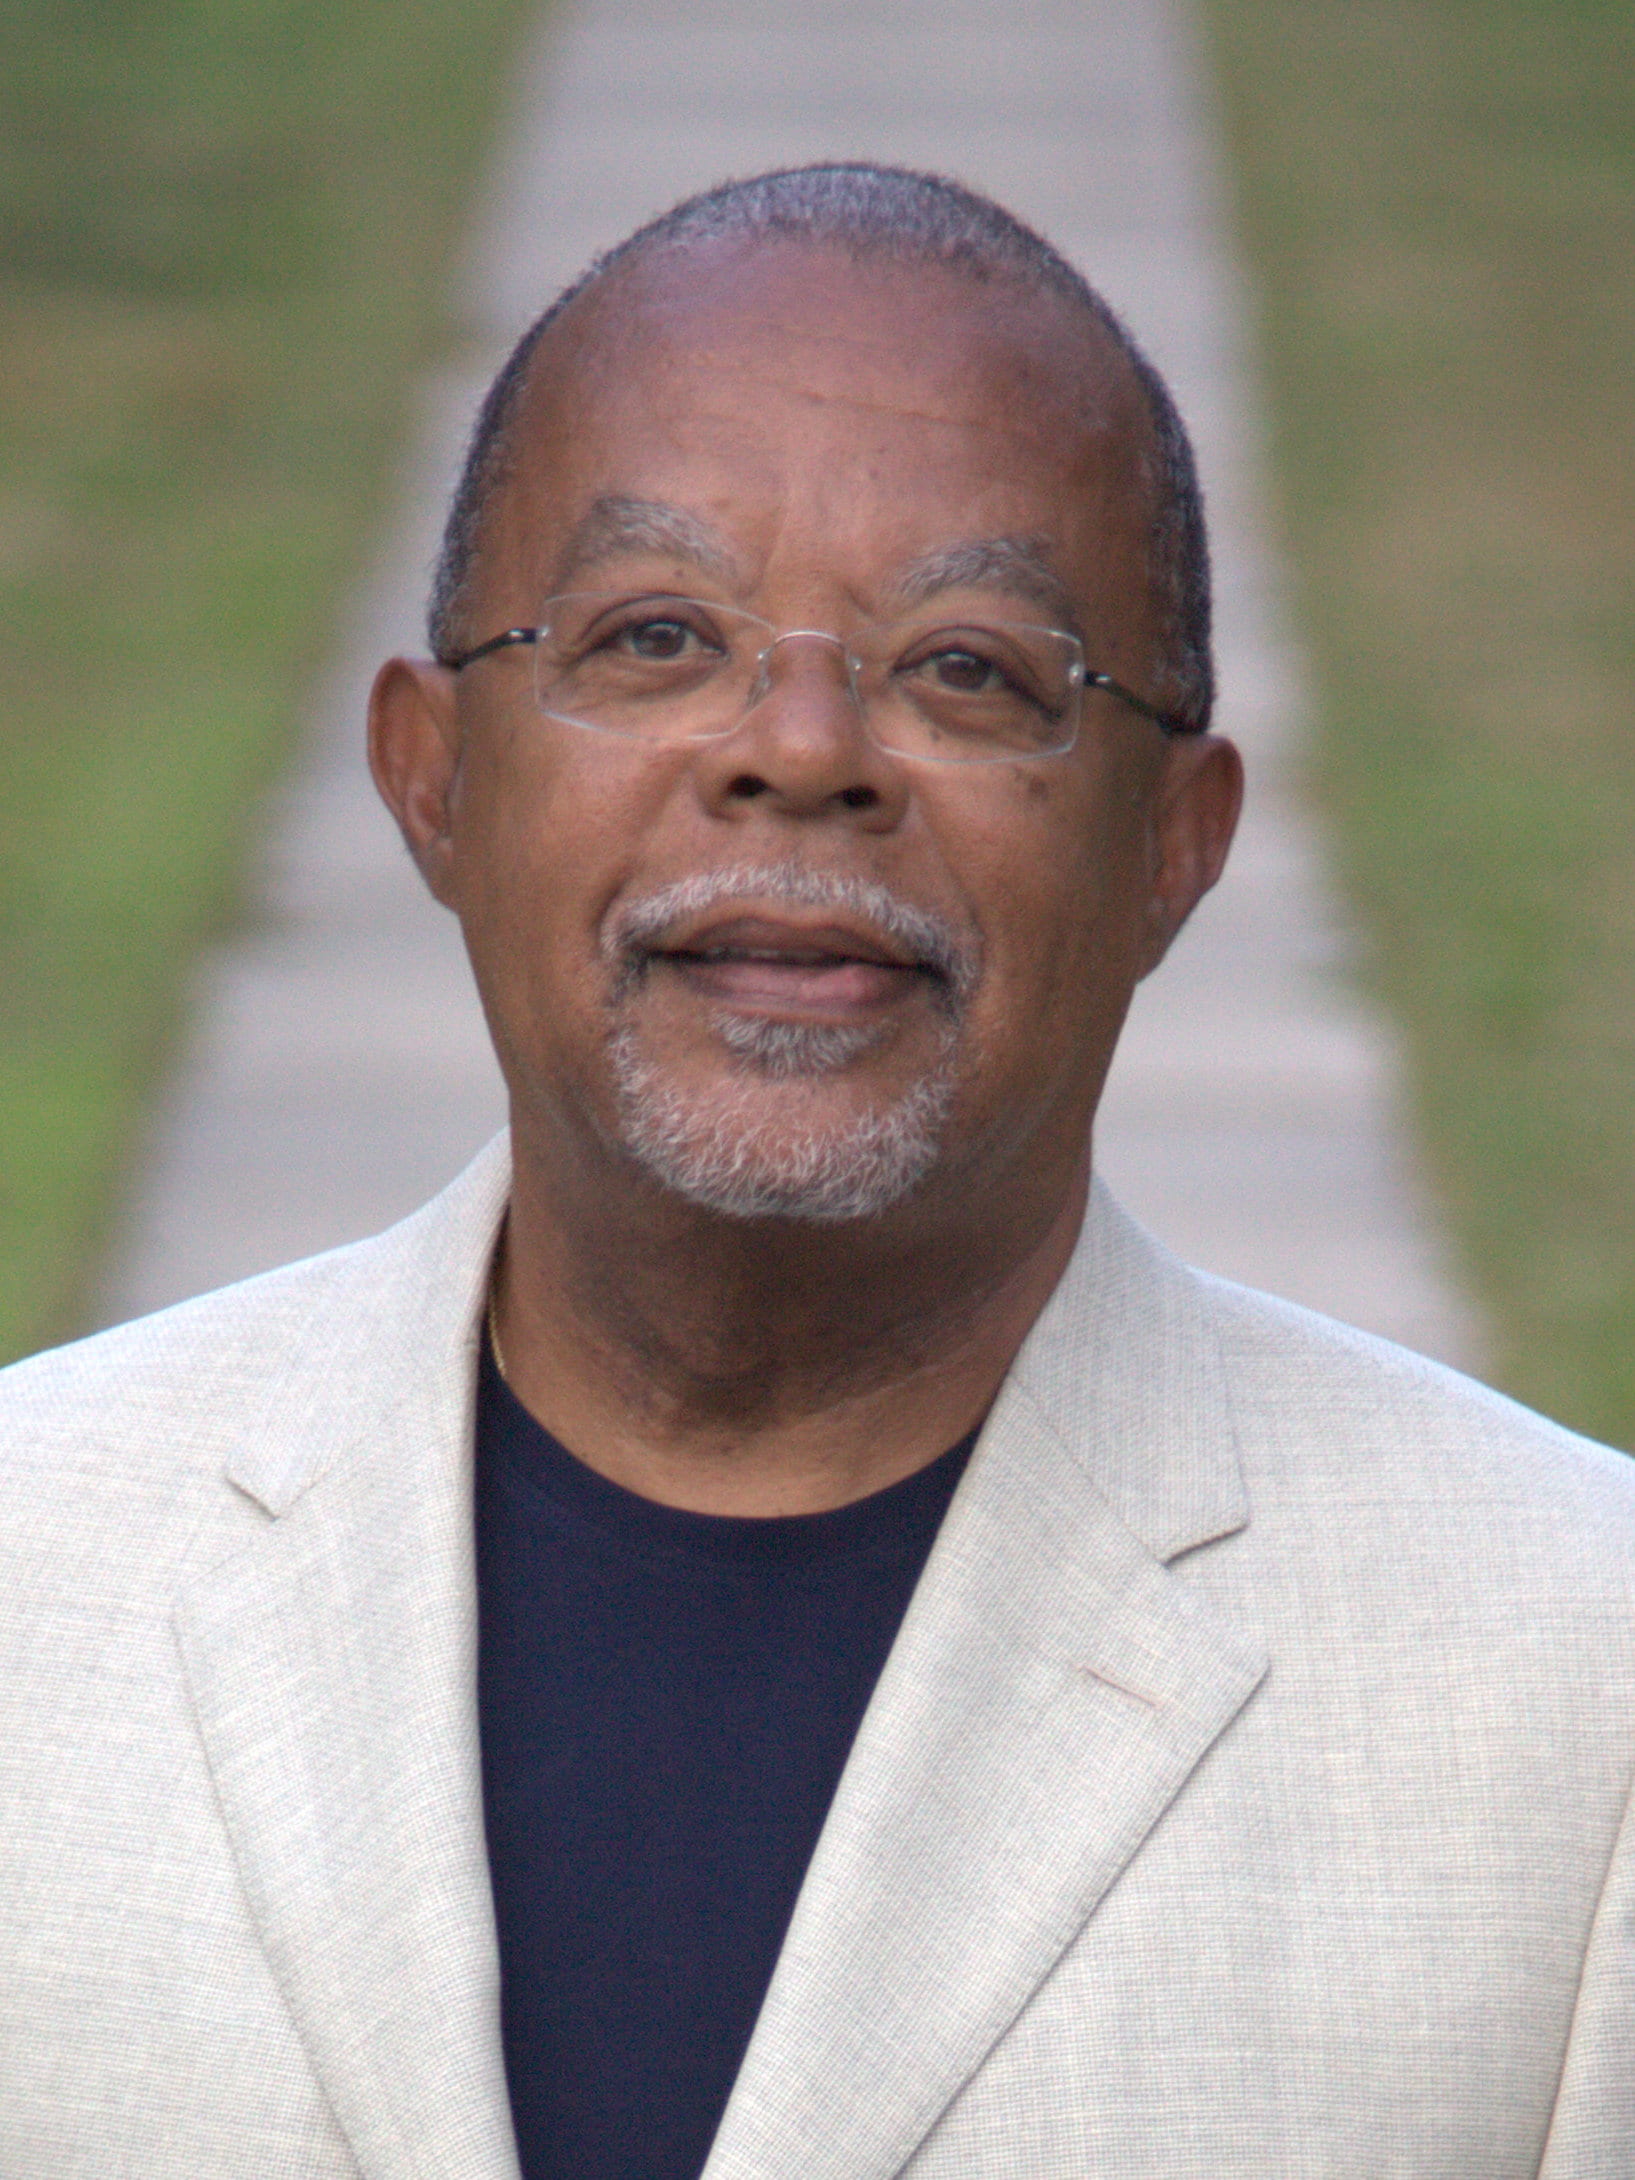 Mysterious Convocation Cancellation: Henry Louis Gates Jr.